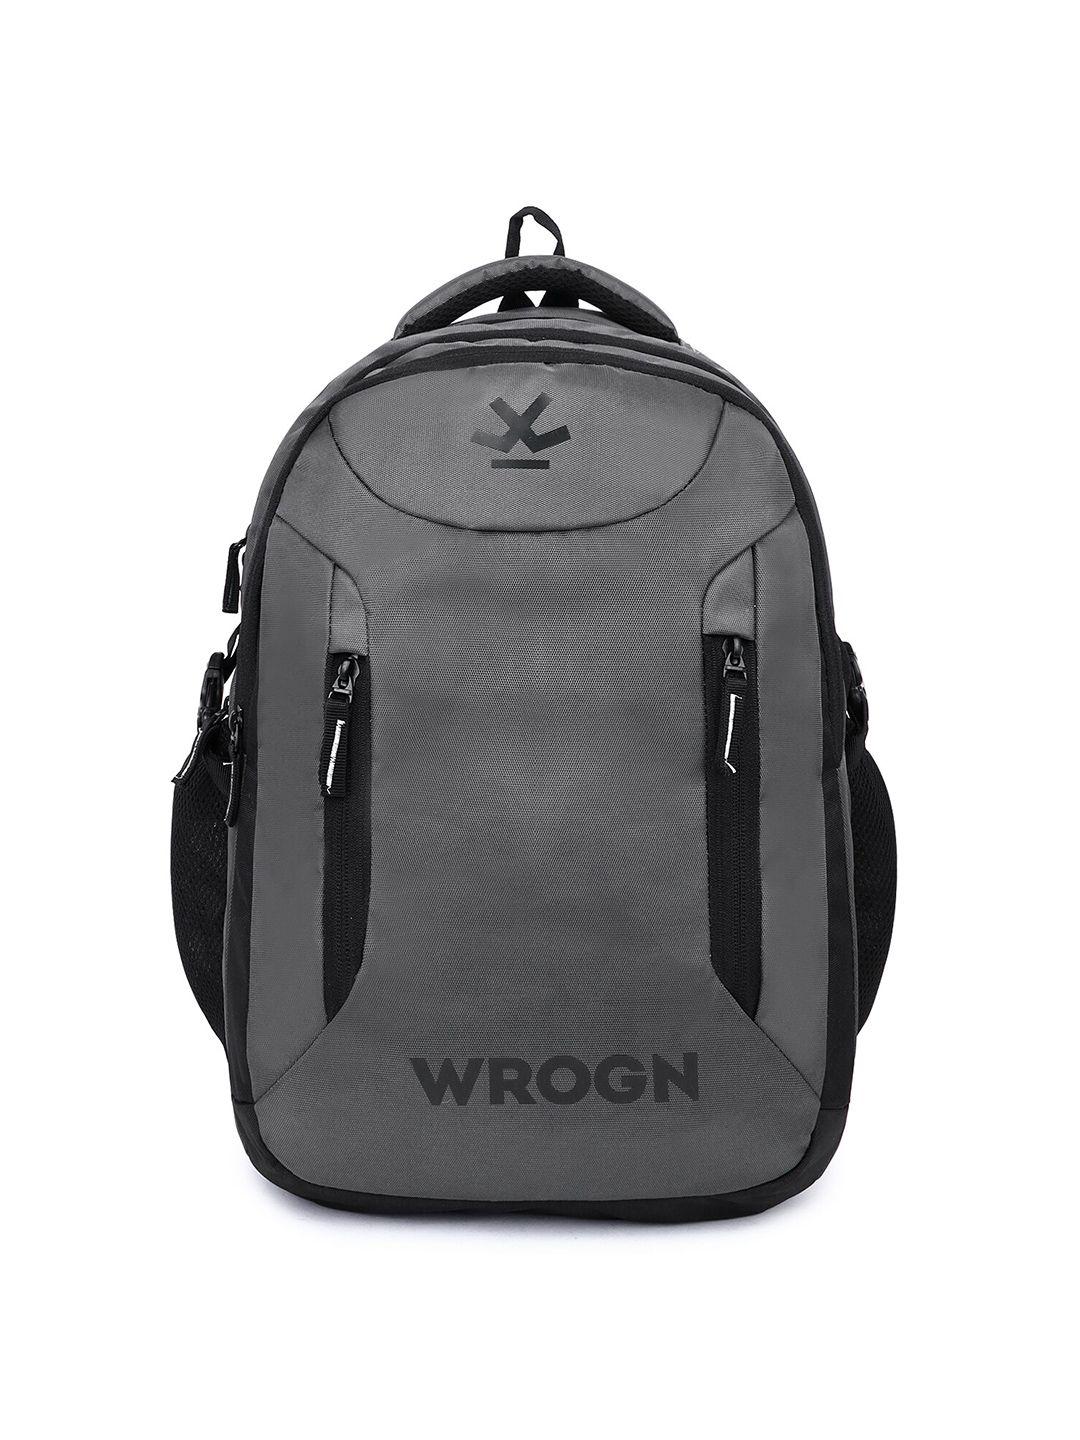 wrogn water resistant backpack with shoe pocket